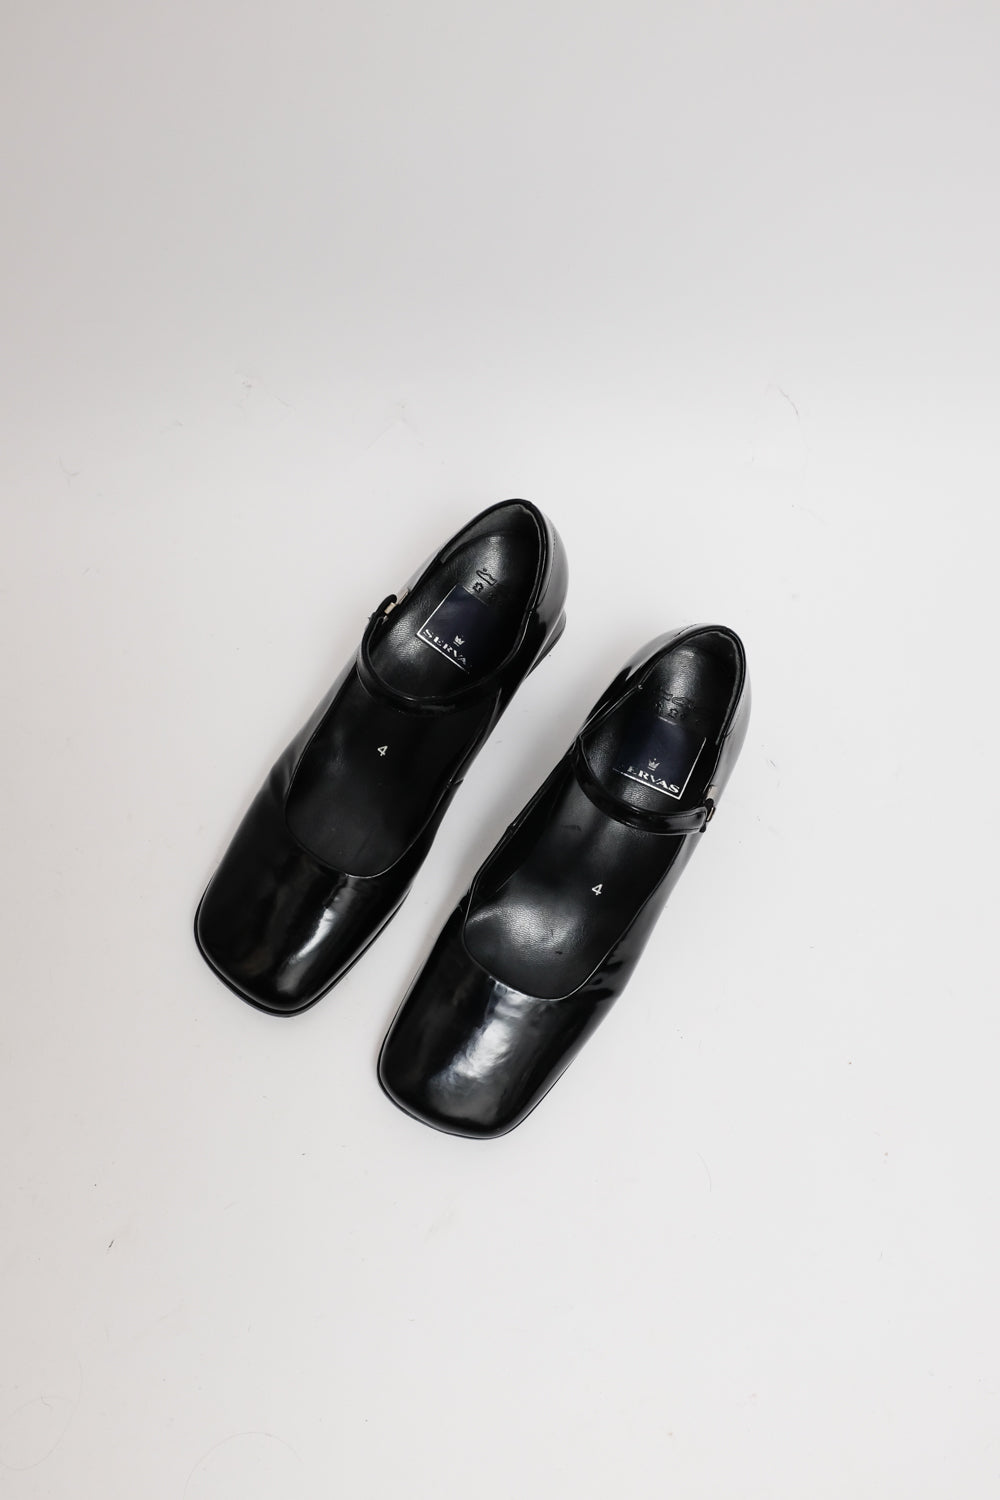 MARY JANE BLACK PATENT LEATHER SHOES 37